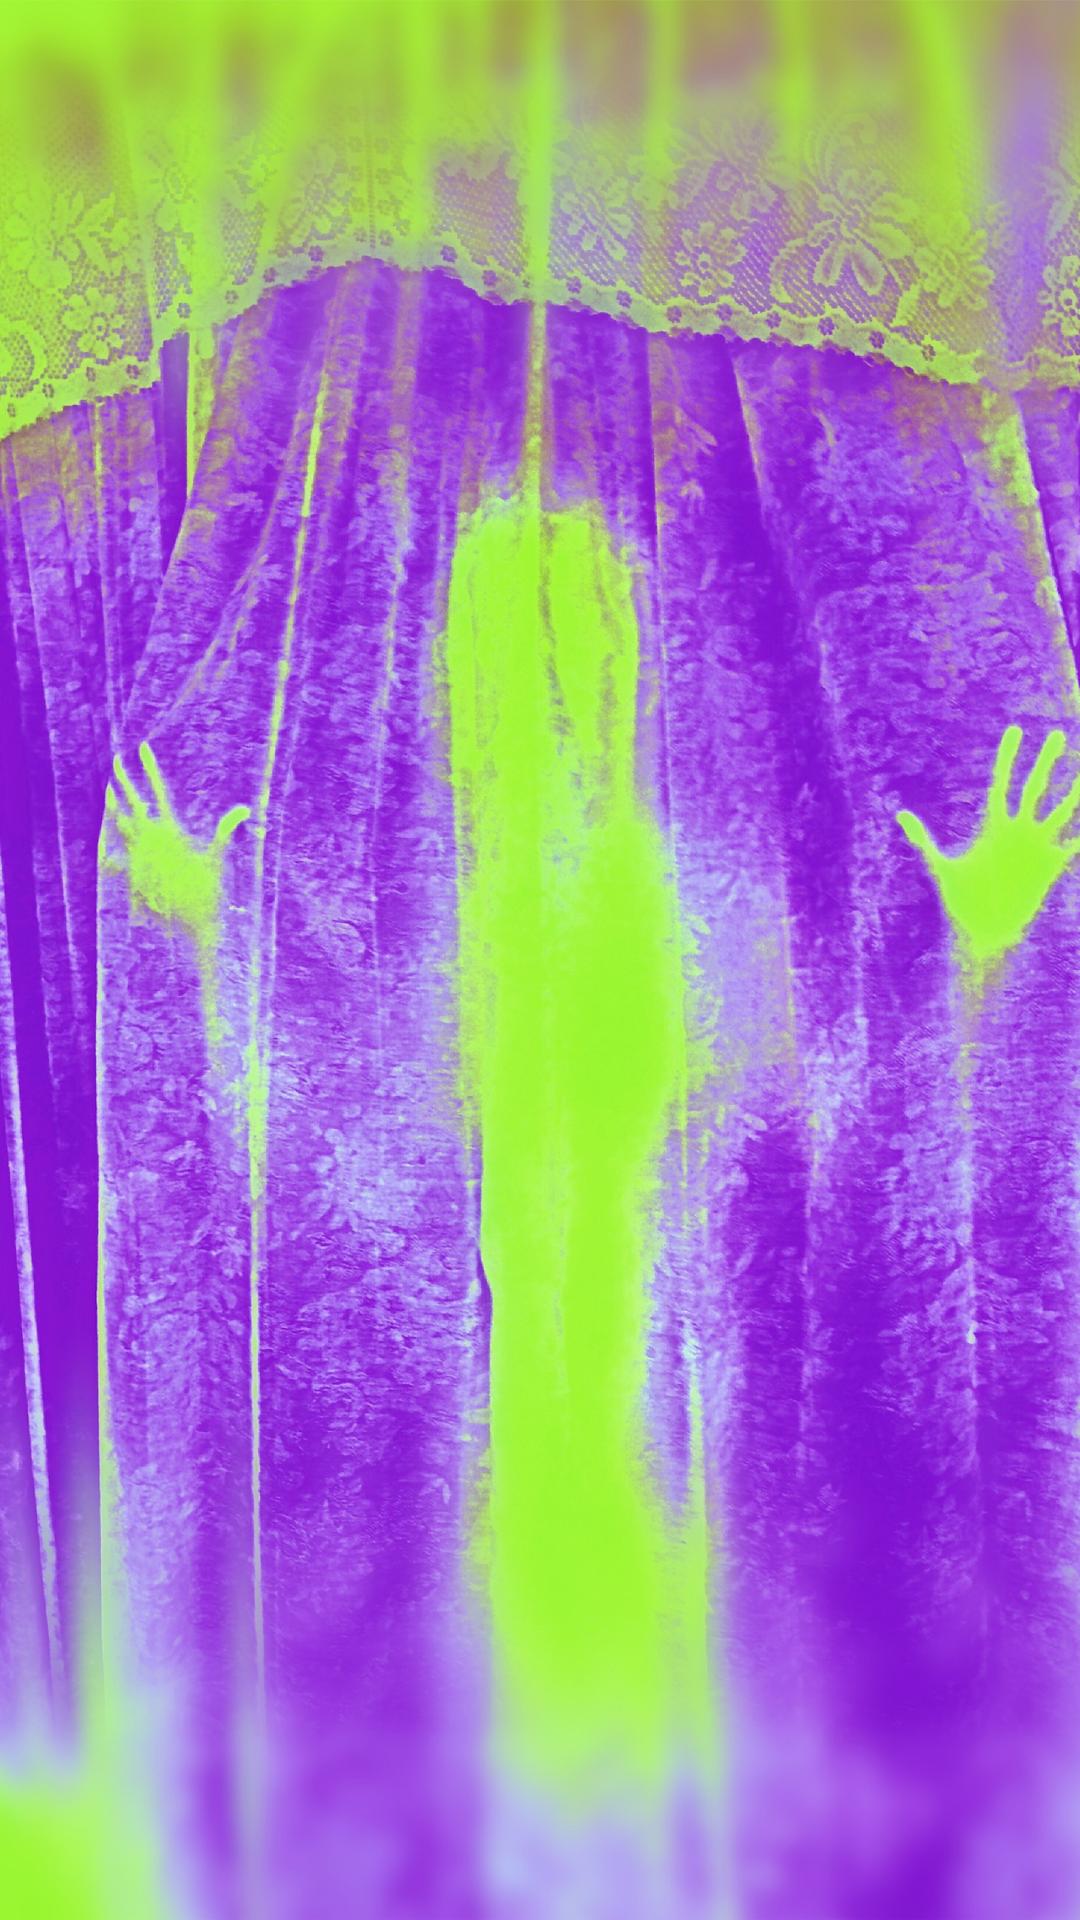 IPhone wallpaper with a purple and green ghostly figure behind a lace curtain - Baddie